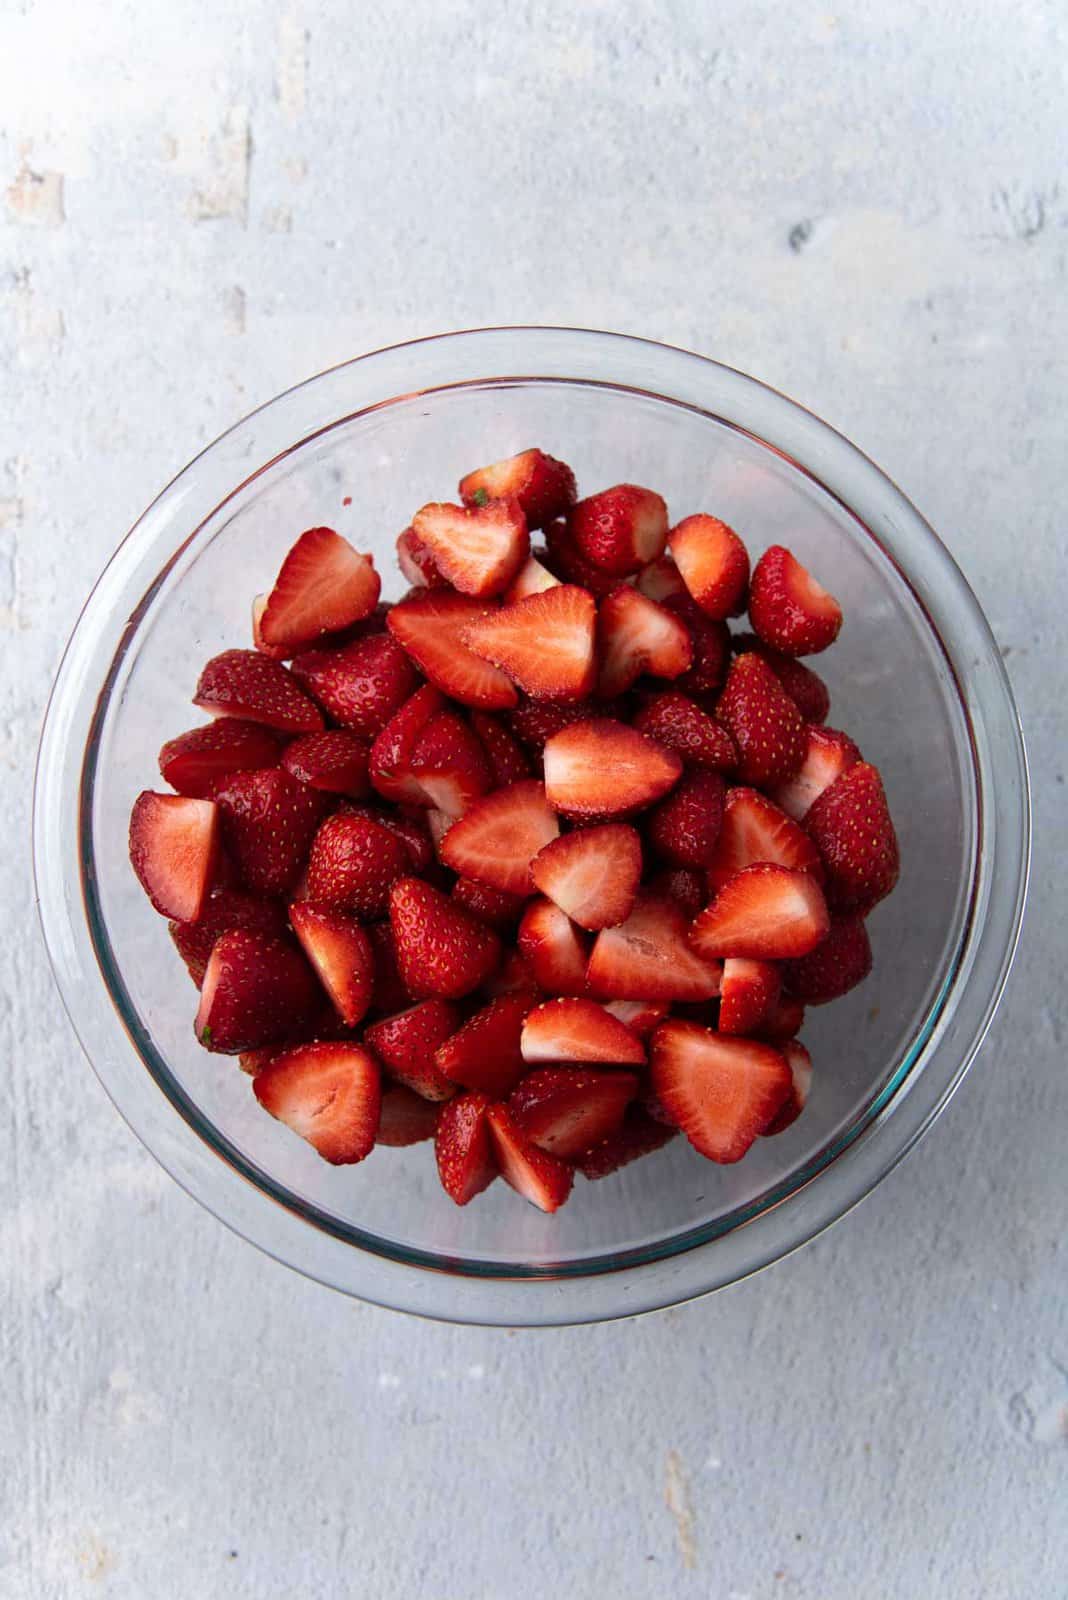 Cut up strawberries in a glass bowl.